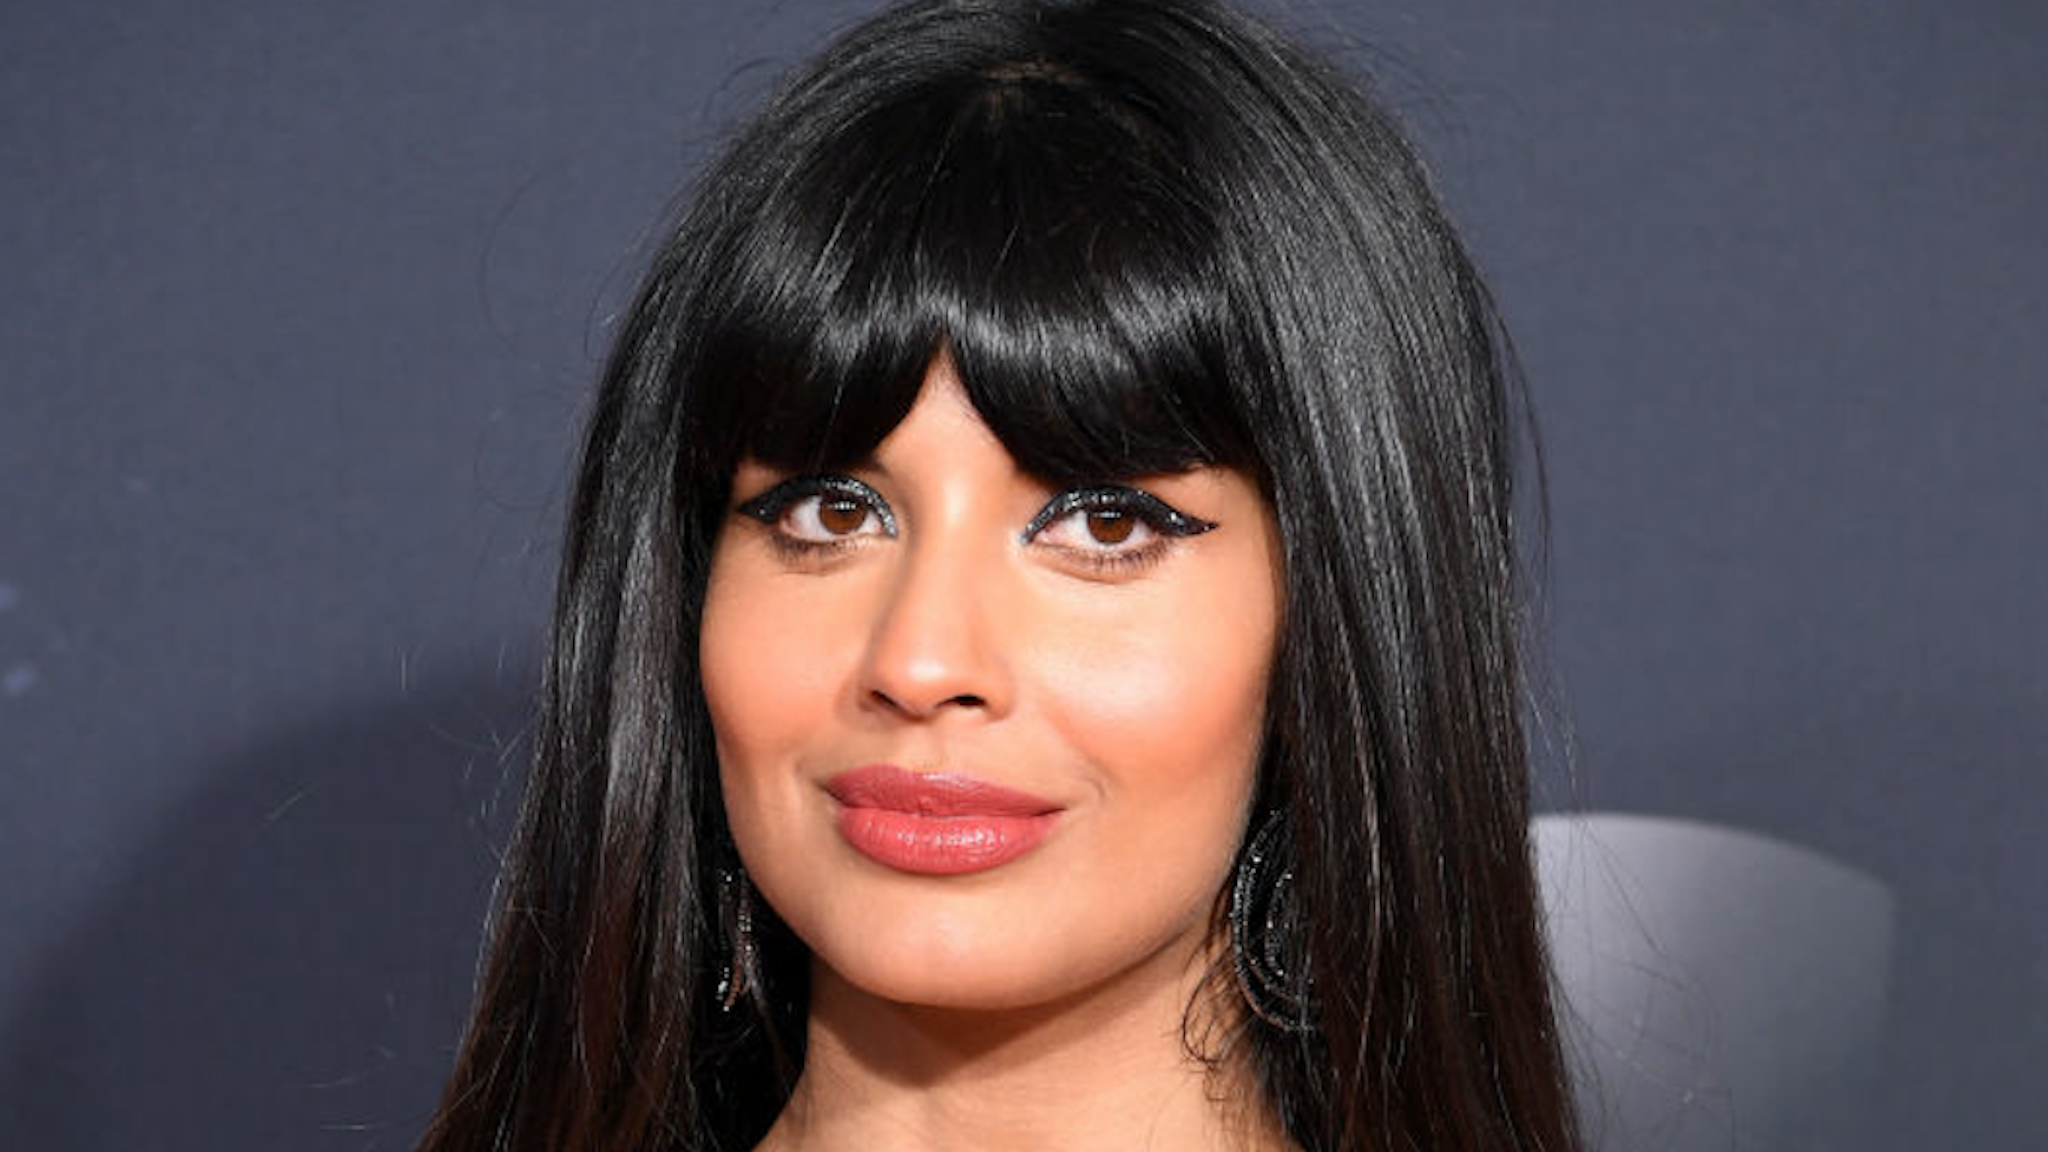 Jameela Jamil arrives at the 2019 American Music Awards at Microsoft Theater on November 24, 2019 in Los Angeles, California.